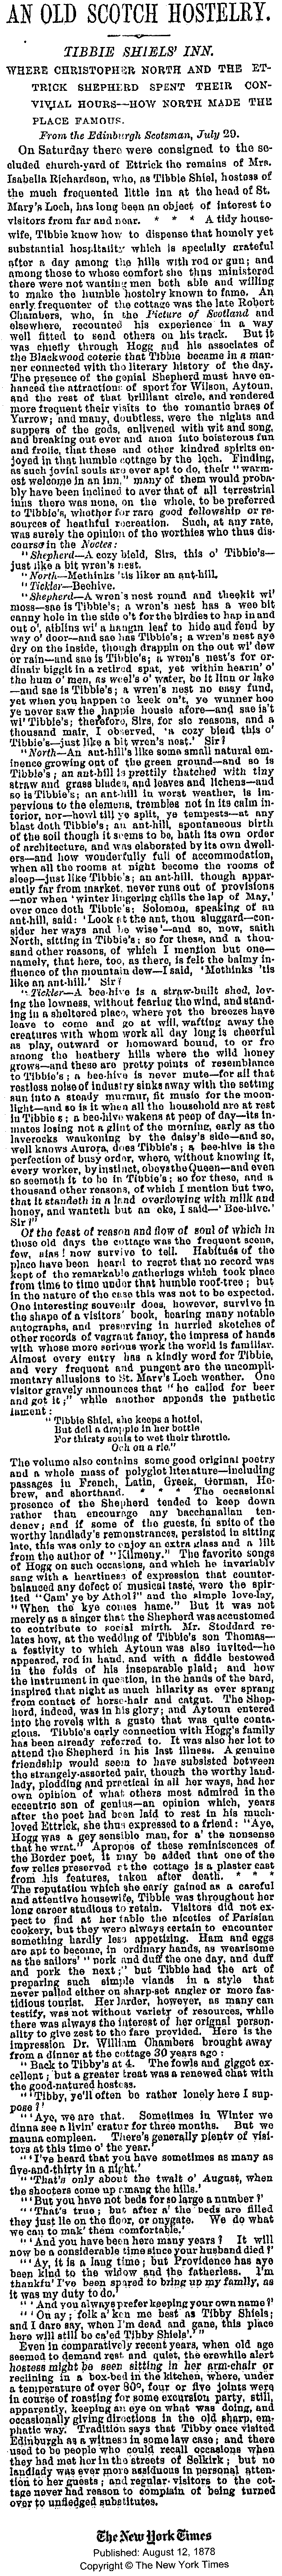 Information about Tibbie Shiels Inn from the New York Times - 12 August 1878.